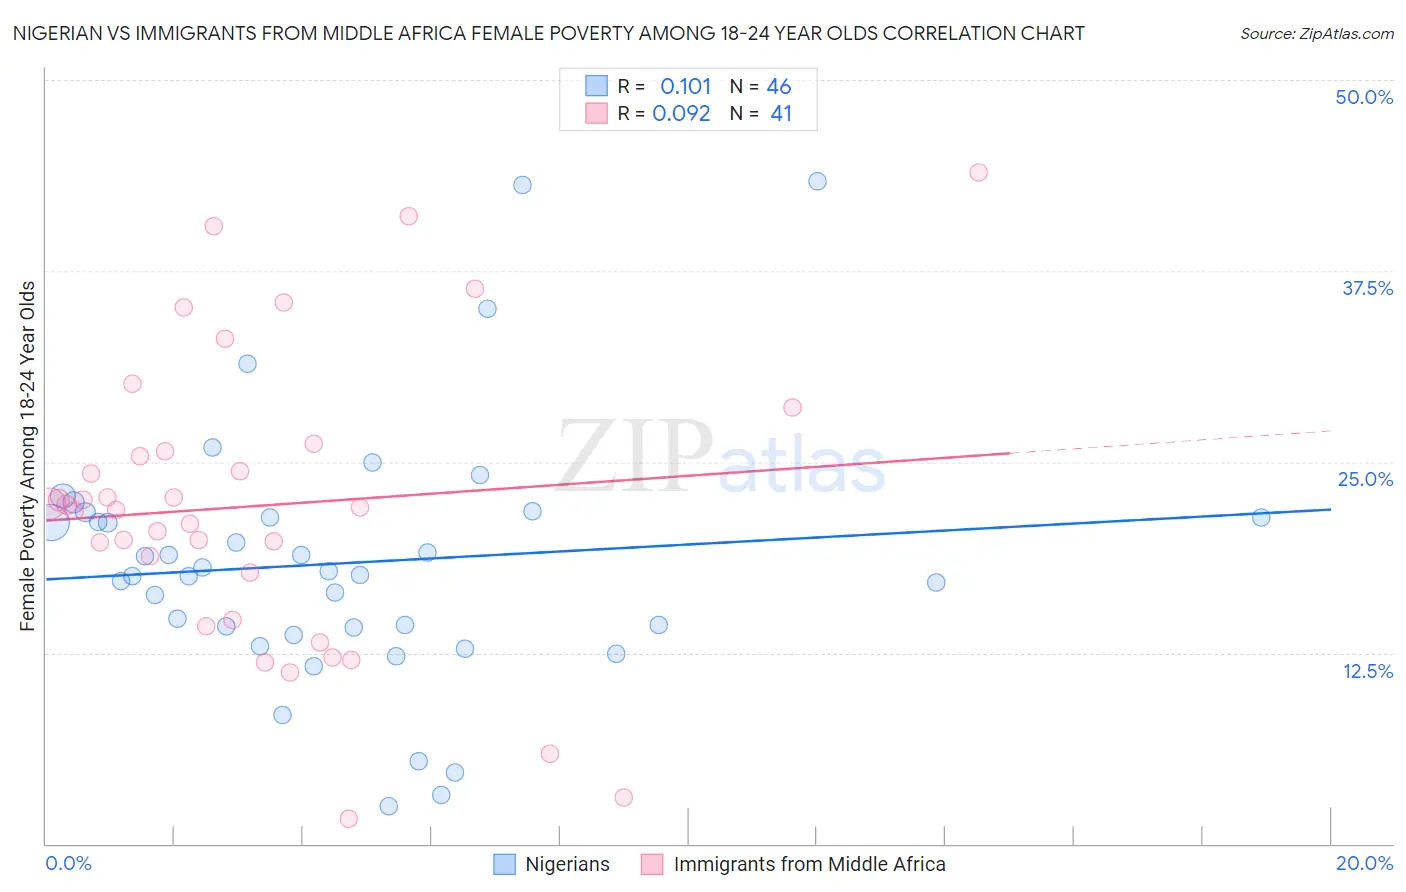 Nigerian vs Immigrants from Middle Africa Female Poverty Among 18-24 Year Olds